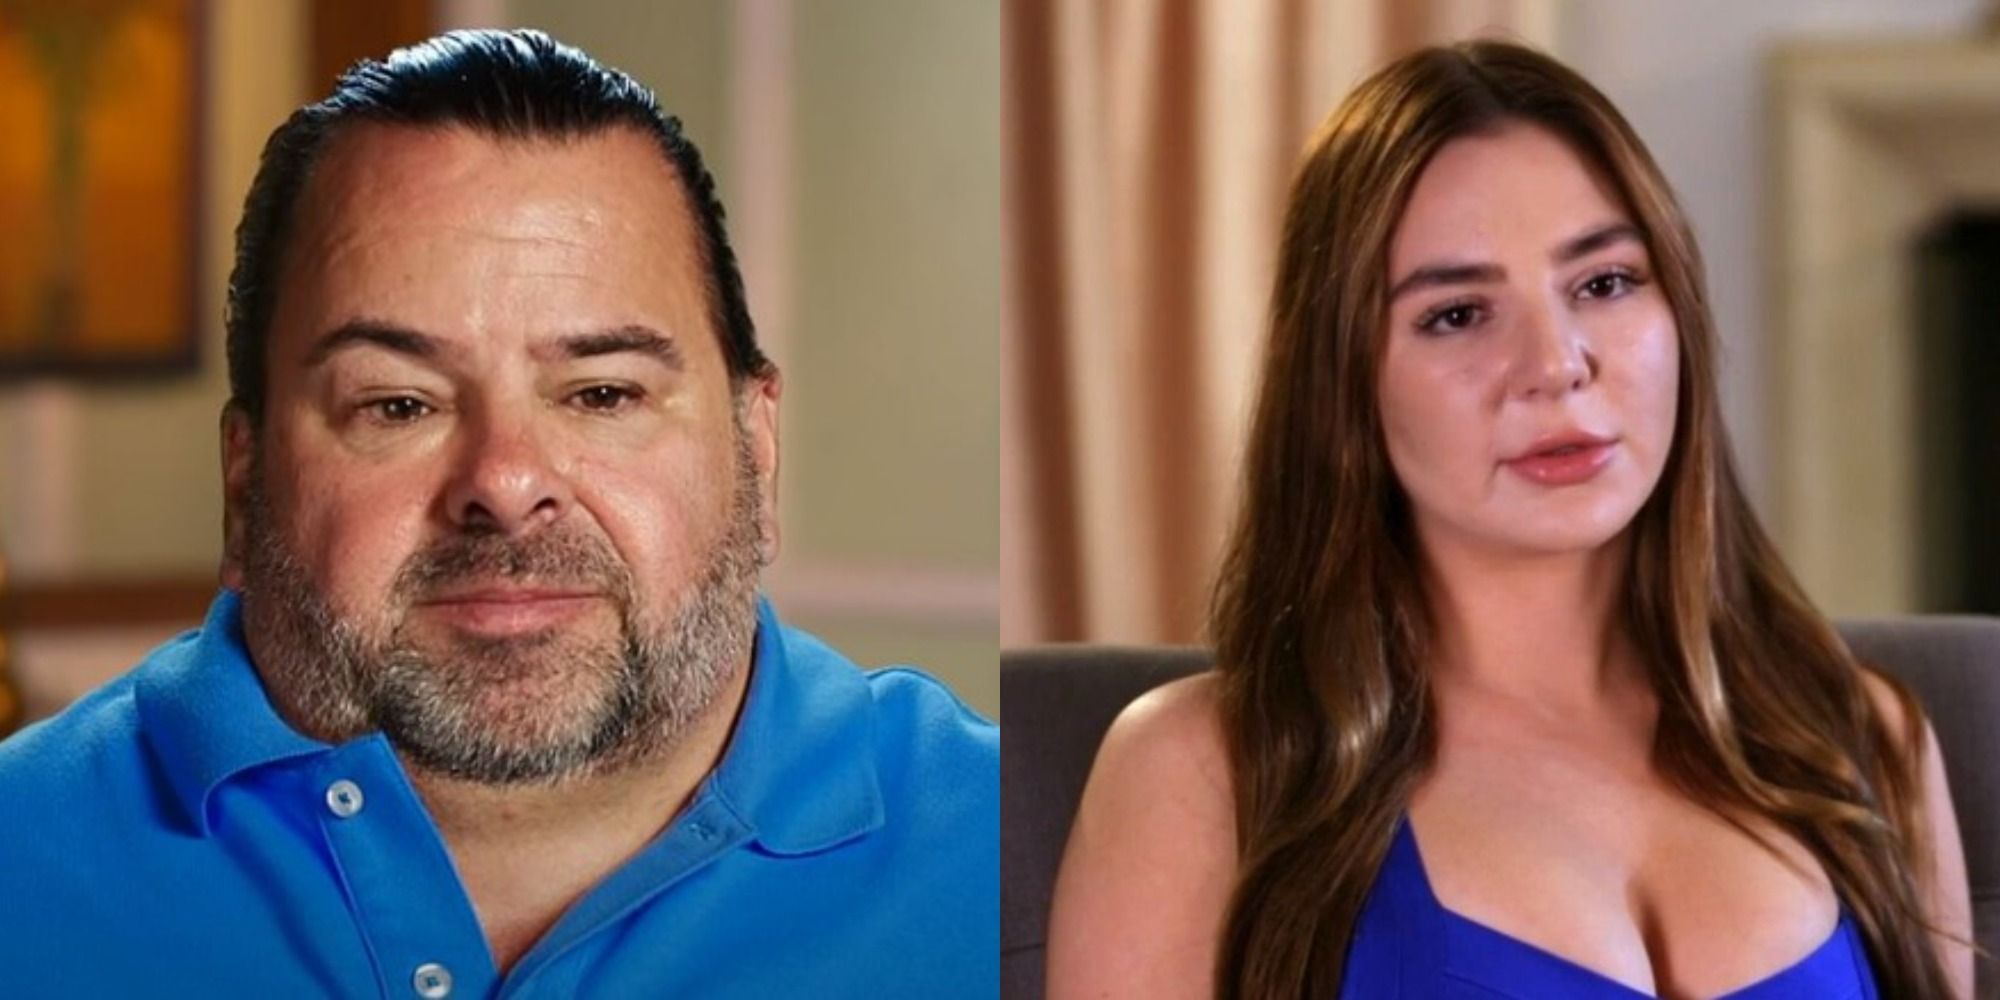 Split iamge showing Big Ed and Anfisa in 90 Day Fiancé.